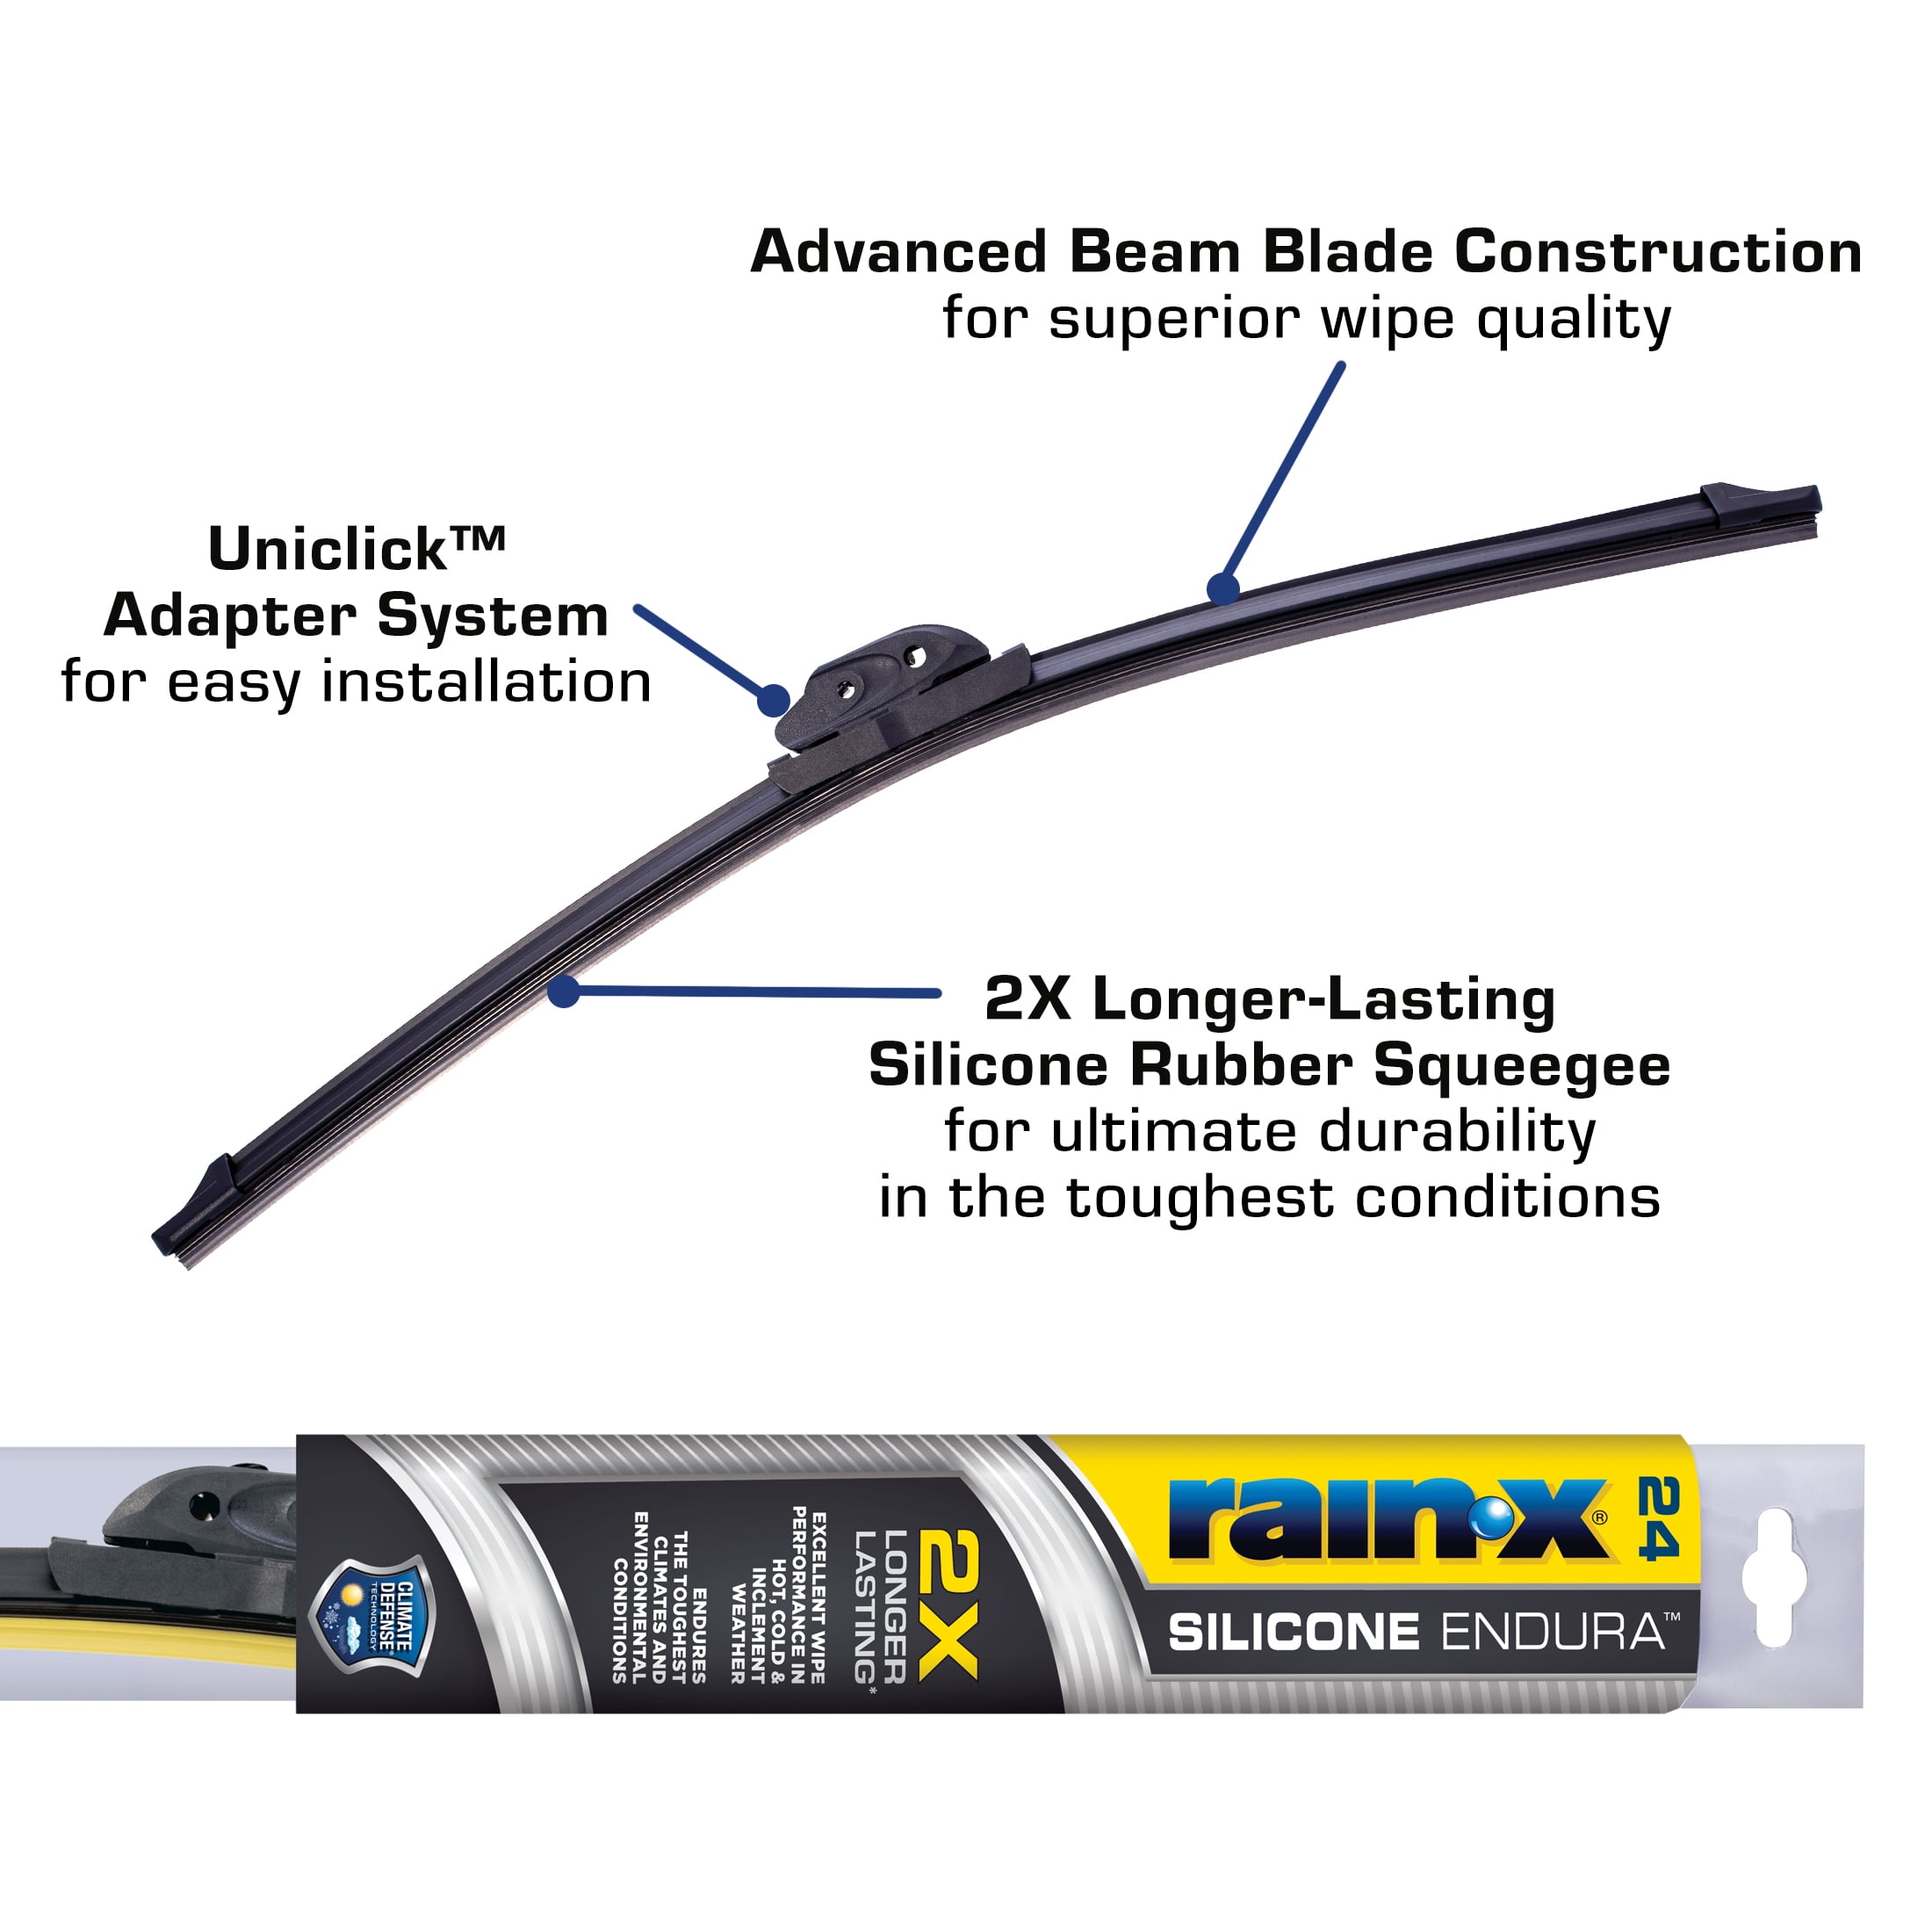 Rain-X® SET-R49850021 Front, Driver and Passenger Side and Rear Latitude Water  Repellency 2-n-1 Series and Rearview Series Wiper Blades, Driver Side - 24  in.; Passenger Side - 18 in.; Rear - 11 in.